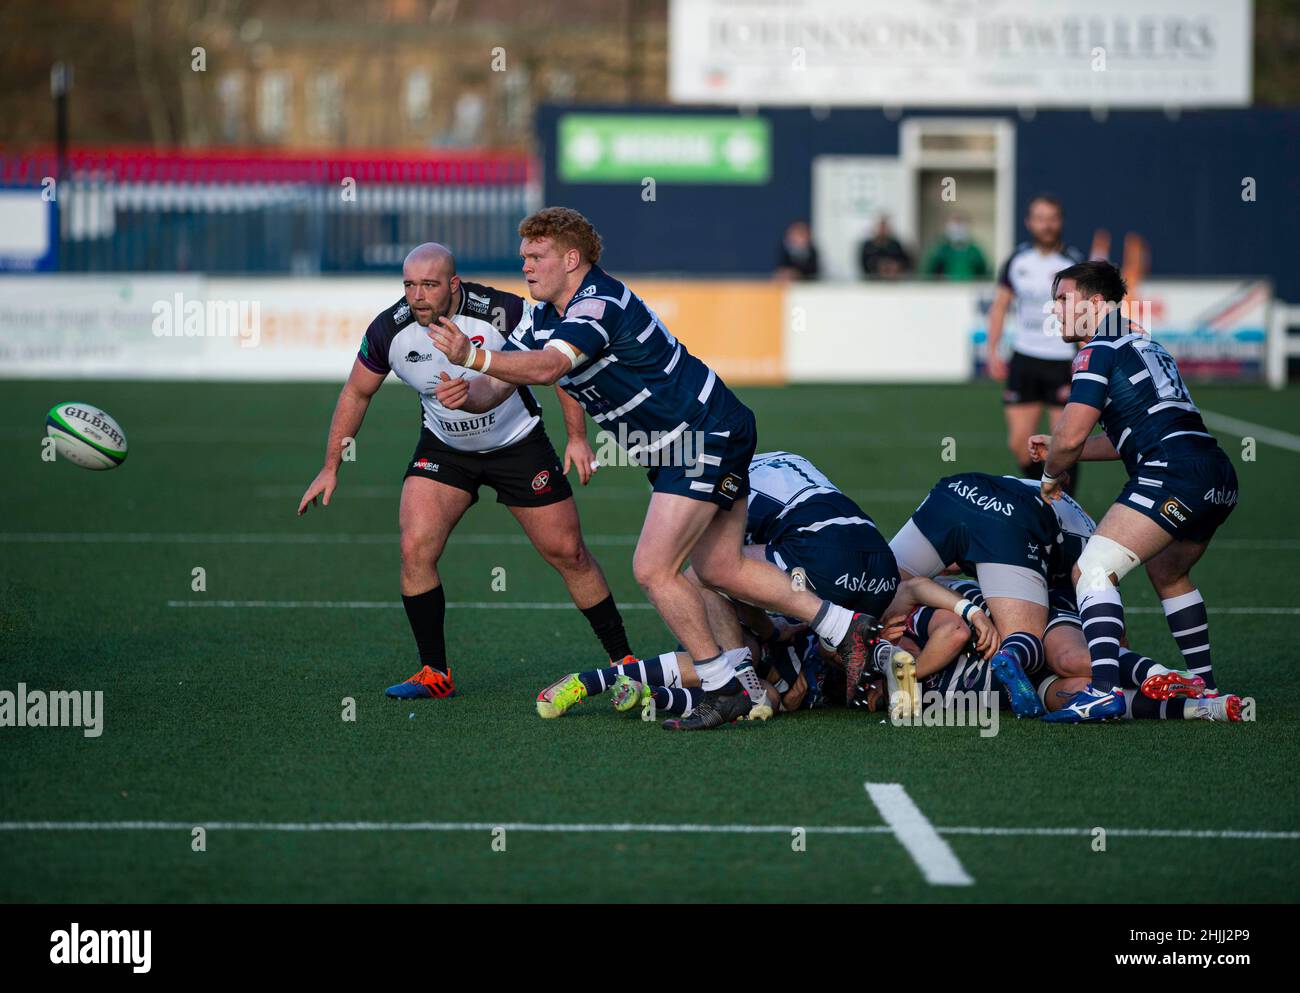 BUTTS PARK ARENA Coventry ,England 29th of January 2022 :  MATT JOHNSON of coventry passes the ball during the Greene King IPA Championship  match  between Coventry Rugby Vs Cornish Pirates  at Butts Park Arena Coventry UK . Final score: Coventry Rugby 21 : 31Cornish Pirates Stock Photo